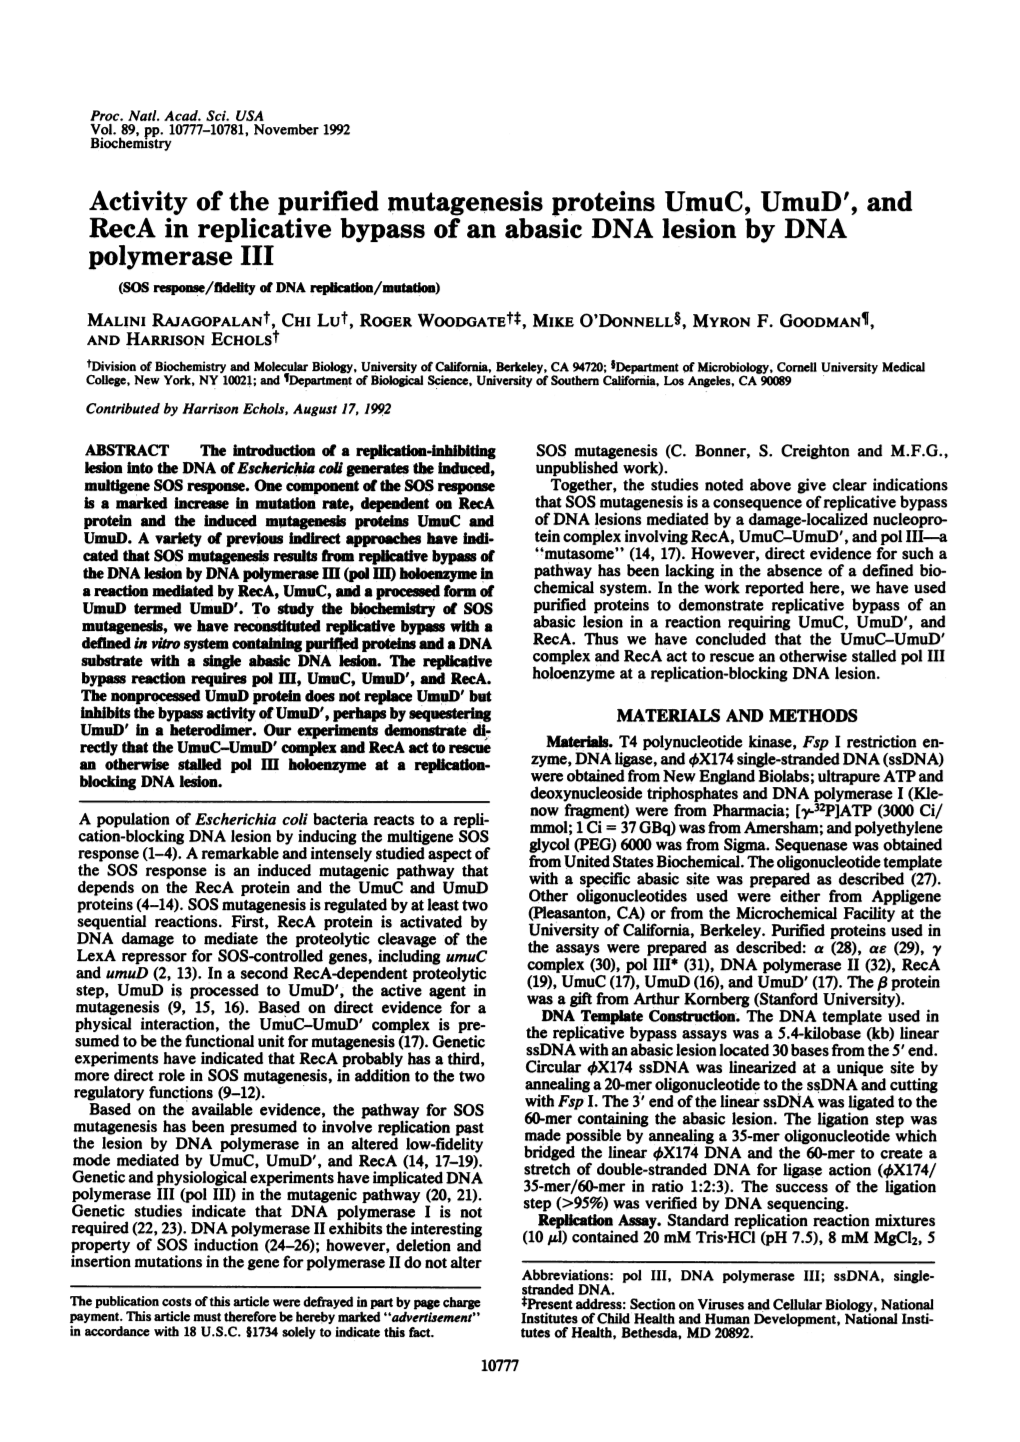 Activity of the Purified Mutagenesis Proteins Umuc, Umud', and Reca